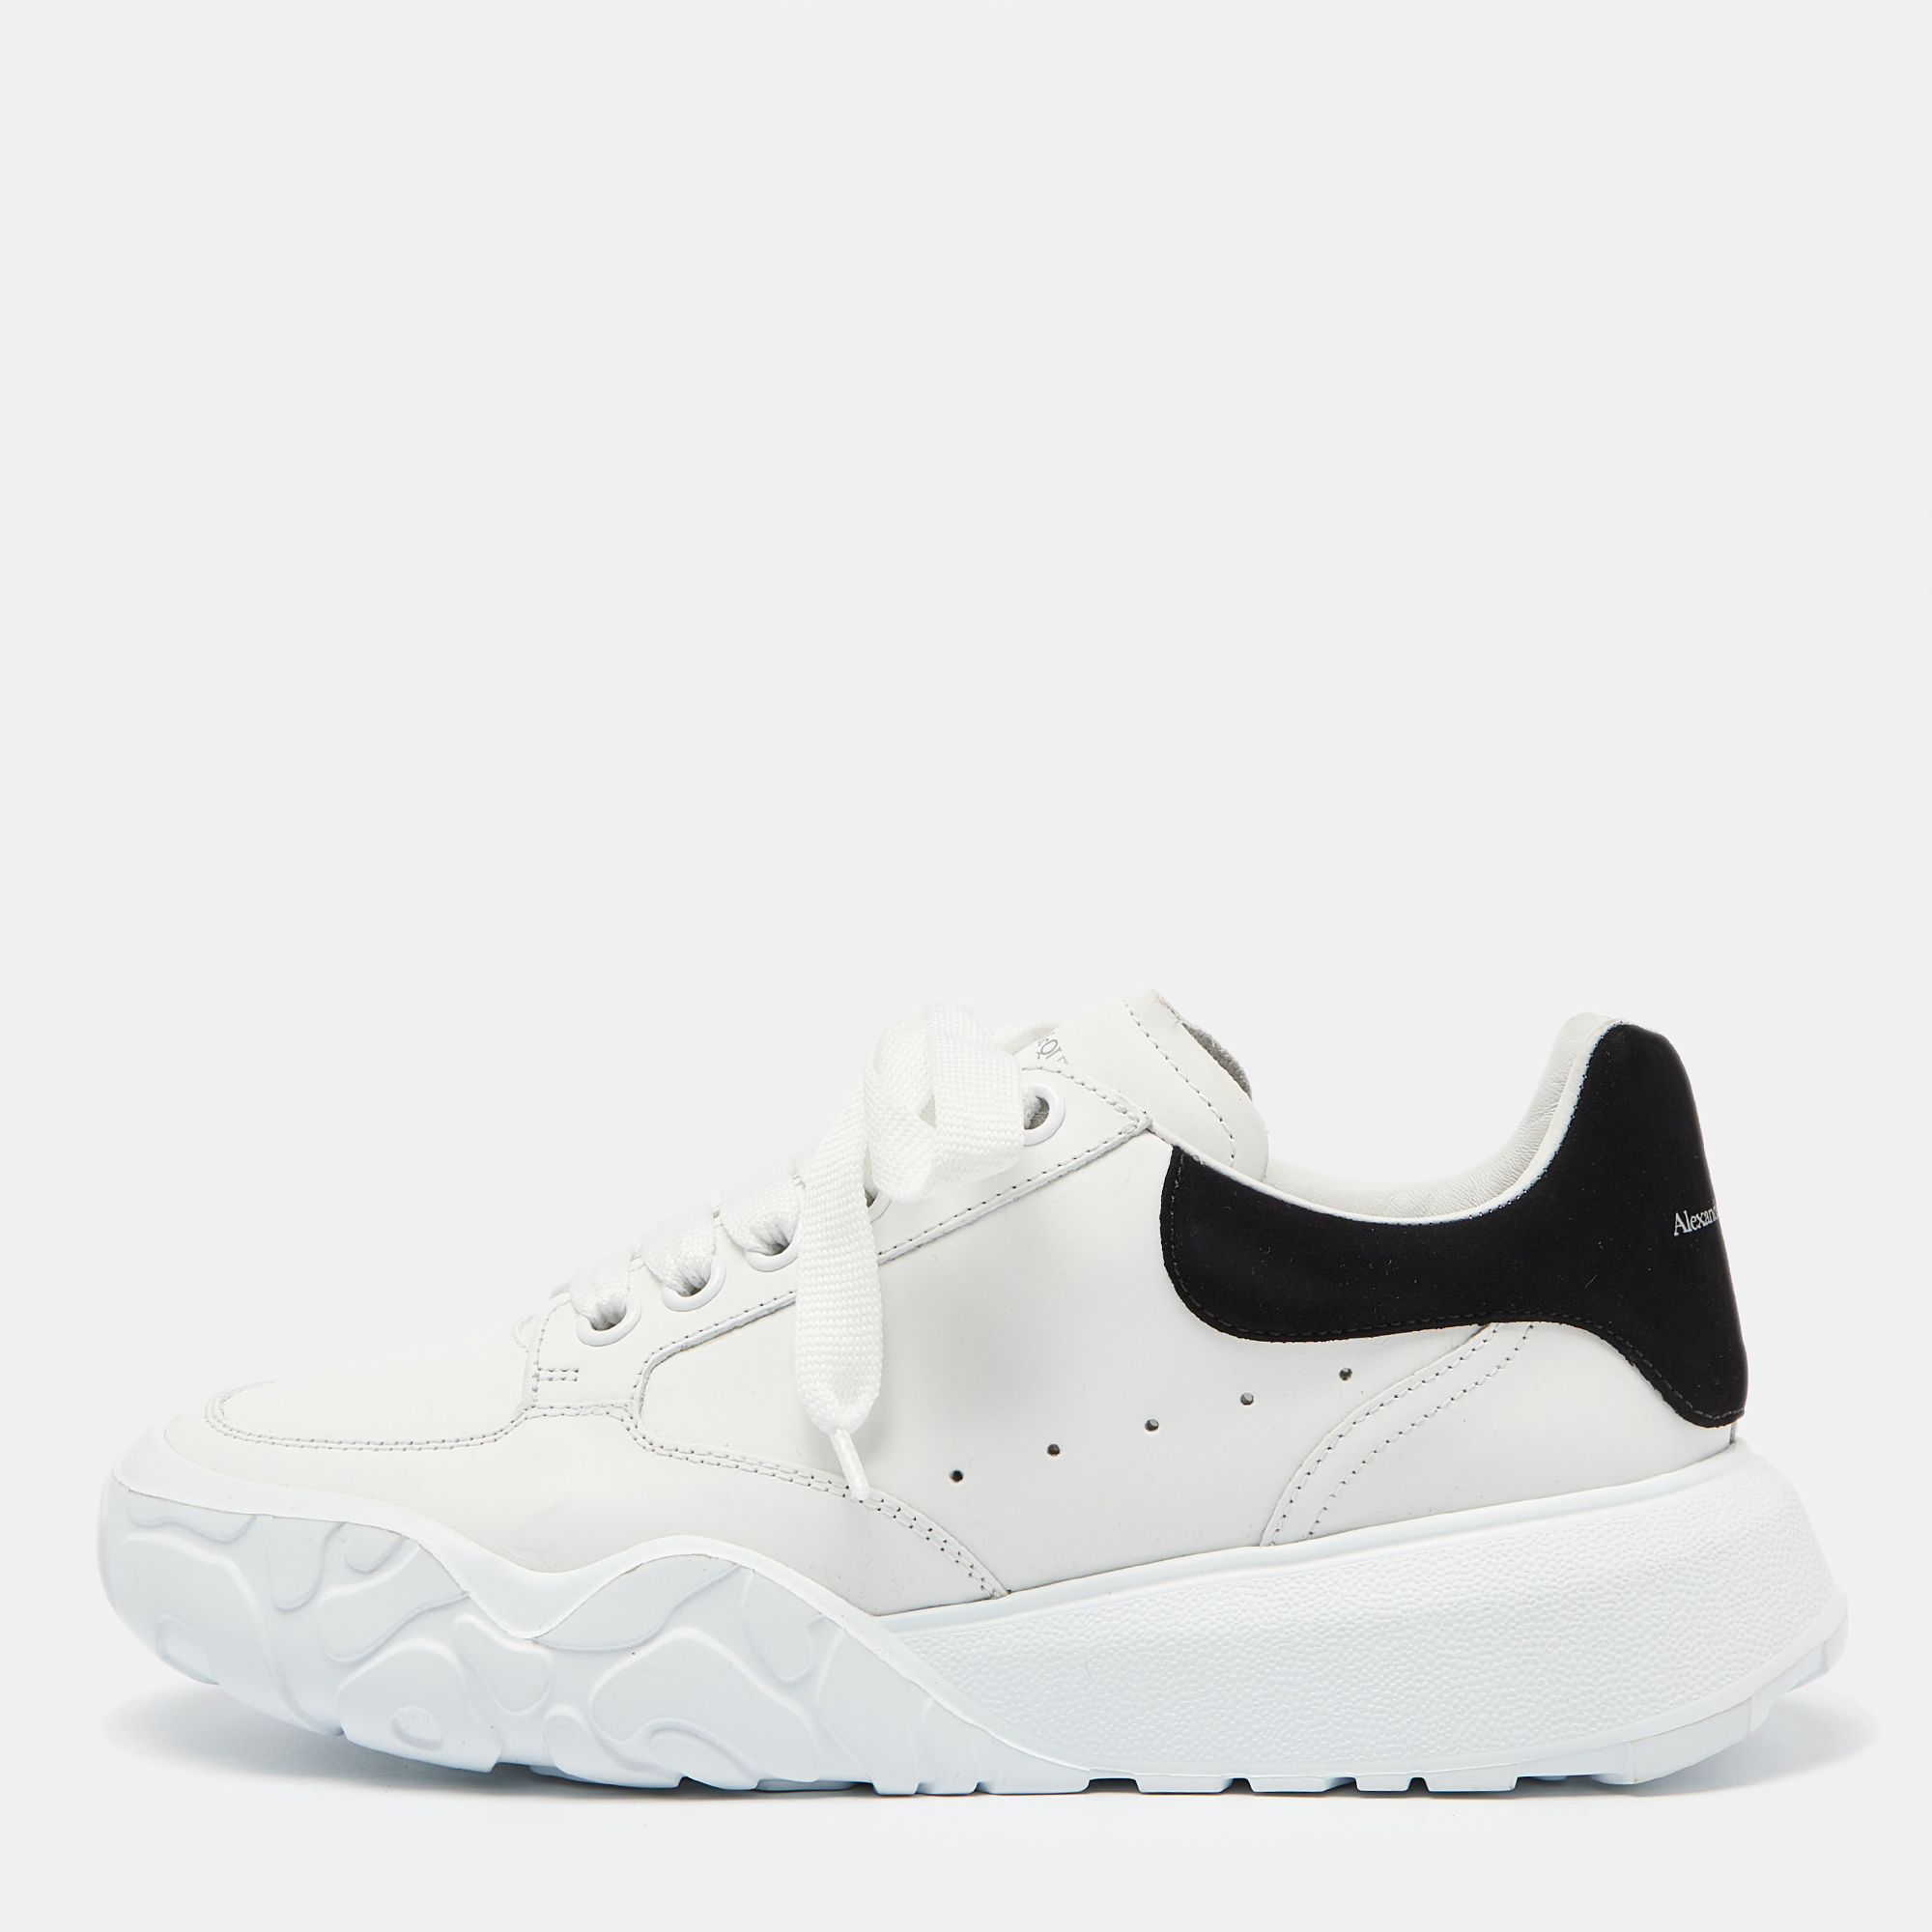 

Alexander McQueen White/Black Leather And Suede Oversized Sneakers Size